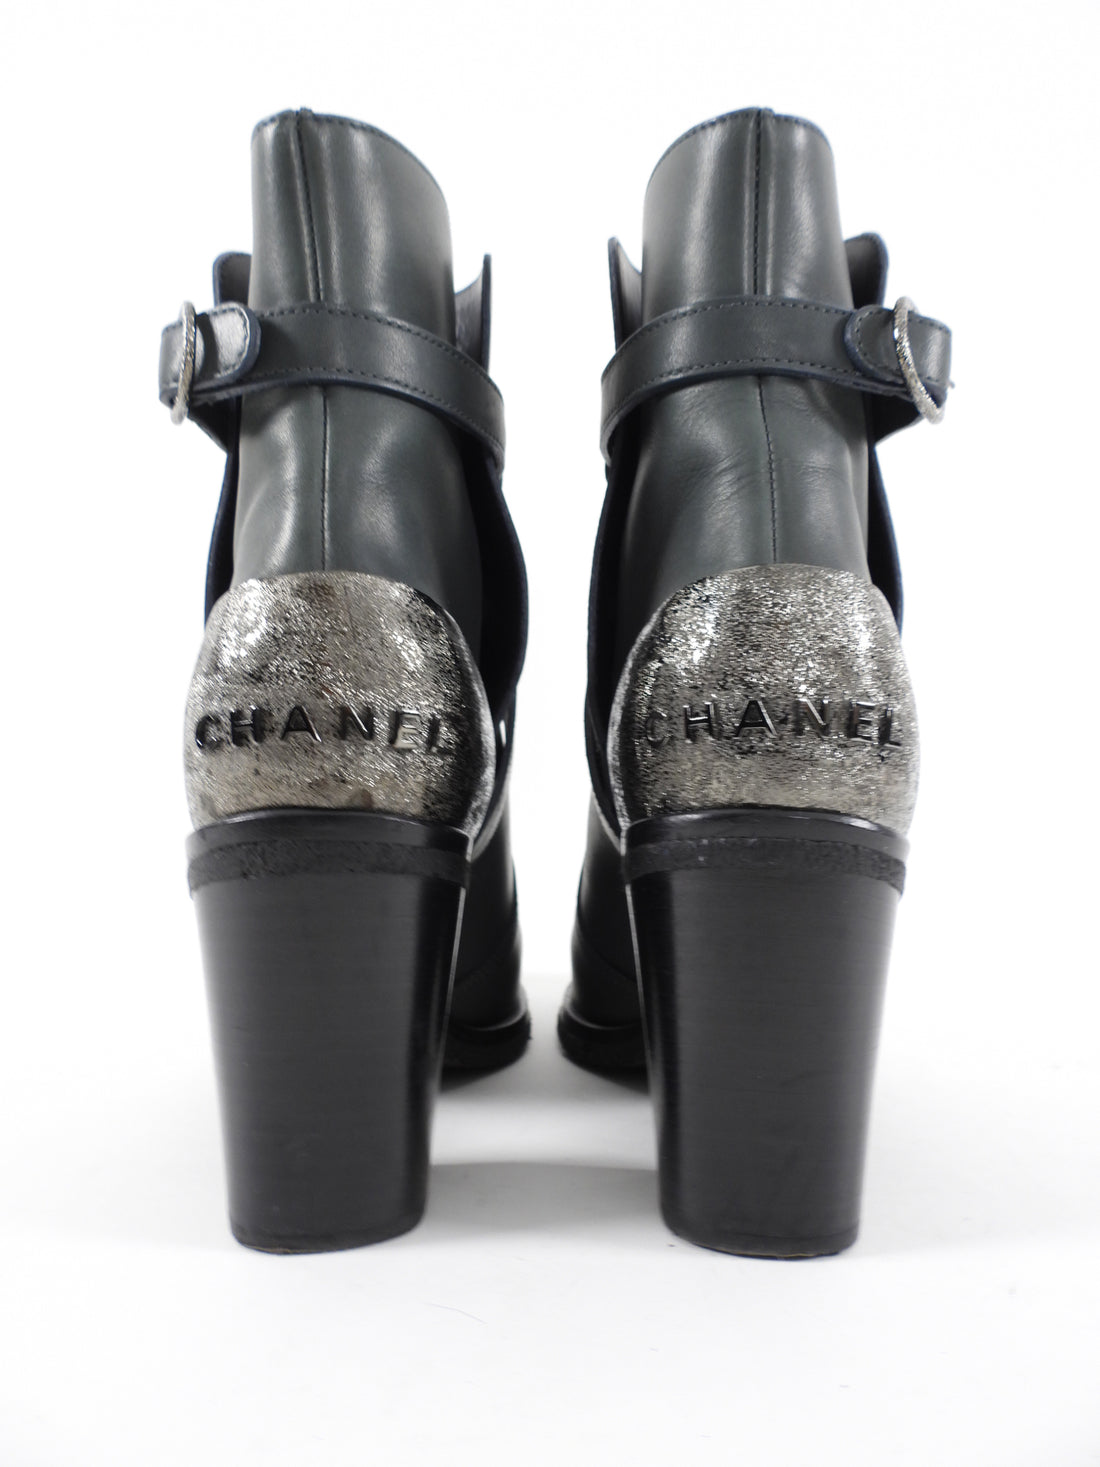 Chanel Grey Leather Logo Boots - 37